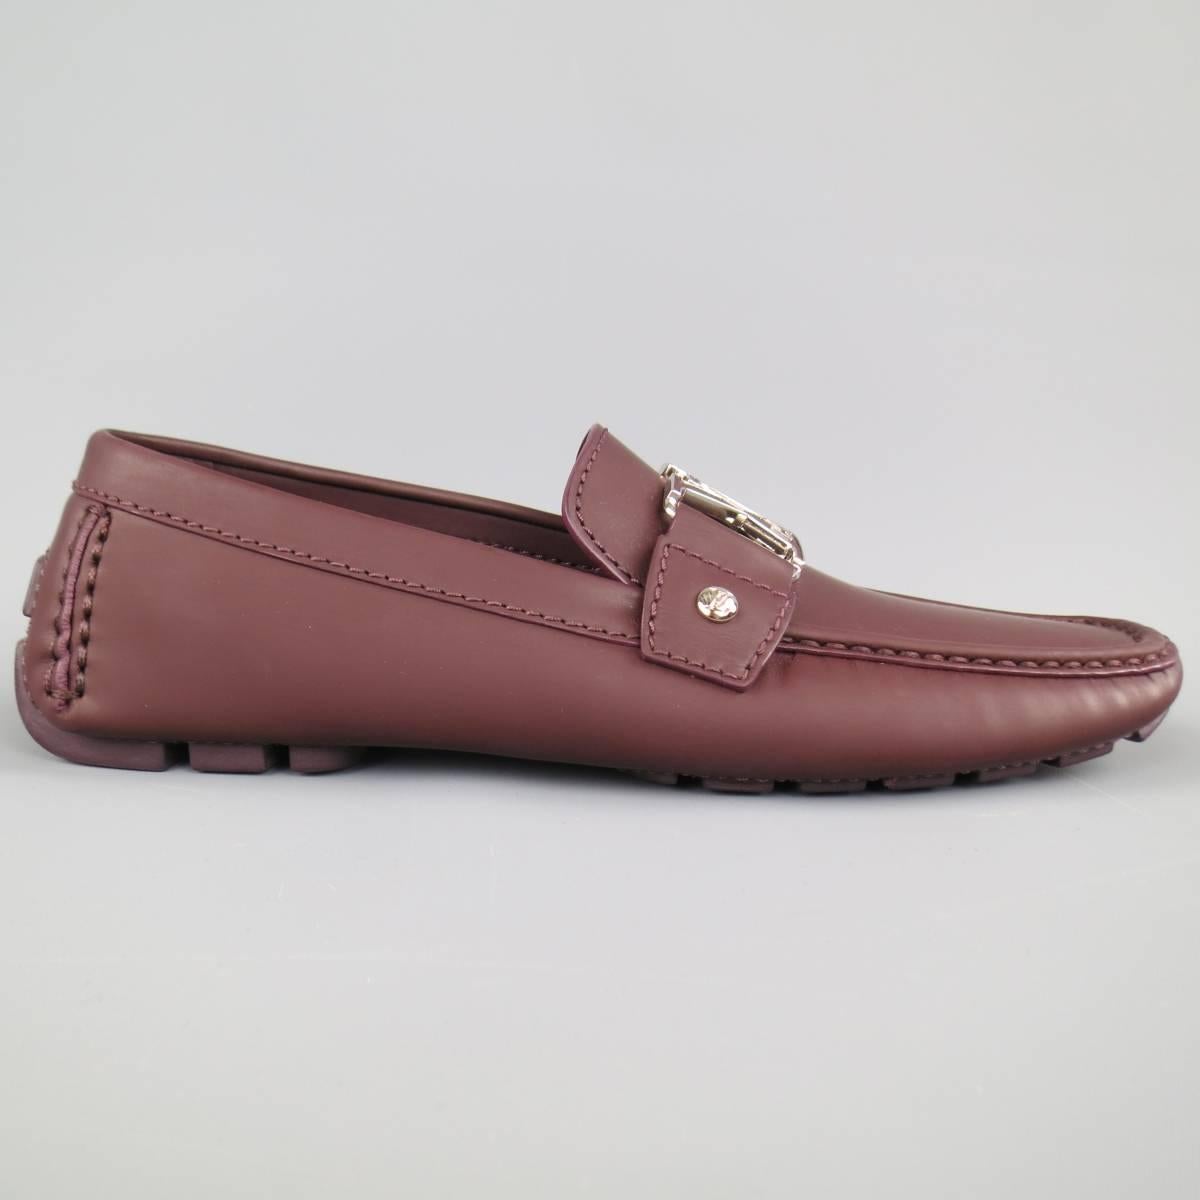 LOUIS VUITTON Monte Carlo loafers in a prune brown rubberized leather featuring a driver sole, apron toe, and silver and brown enamel LV logo pendant. Made in Italy.
 
Brand New. Retails at $650.00.
Marked: 5 M
 
Outsole: 11 x 4 in.